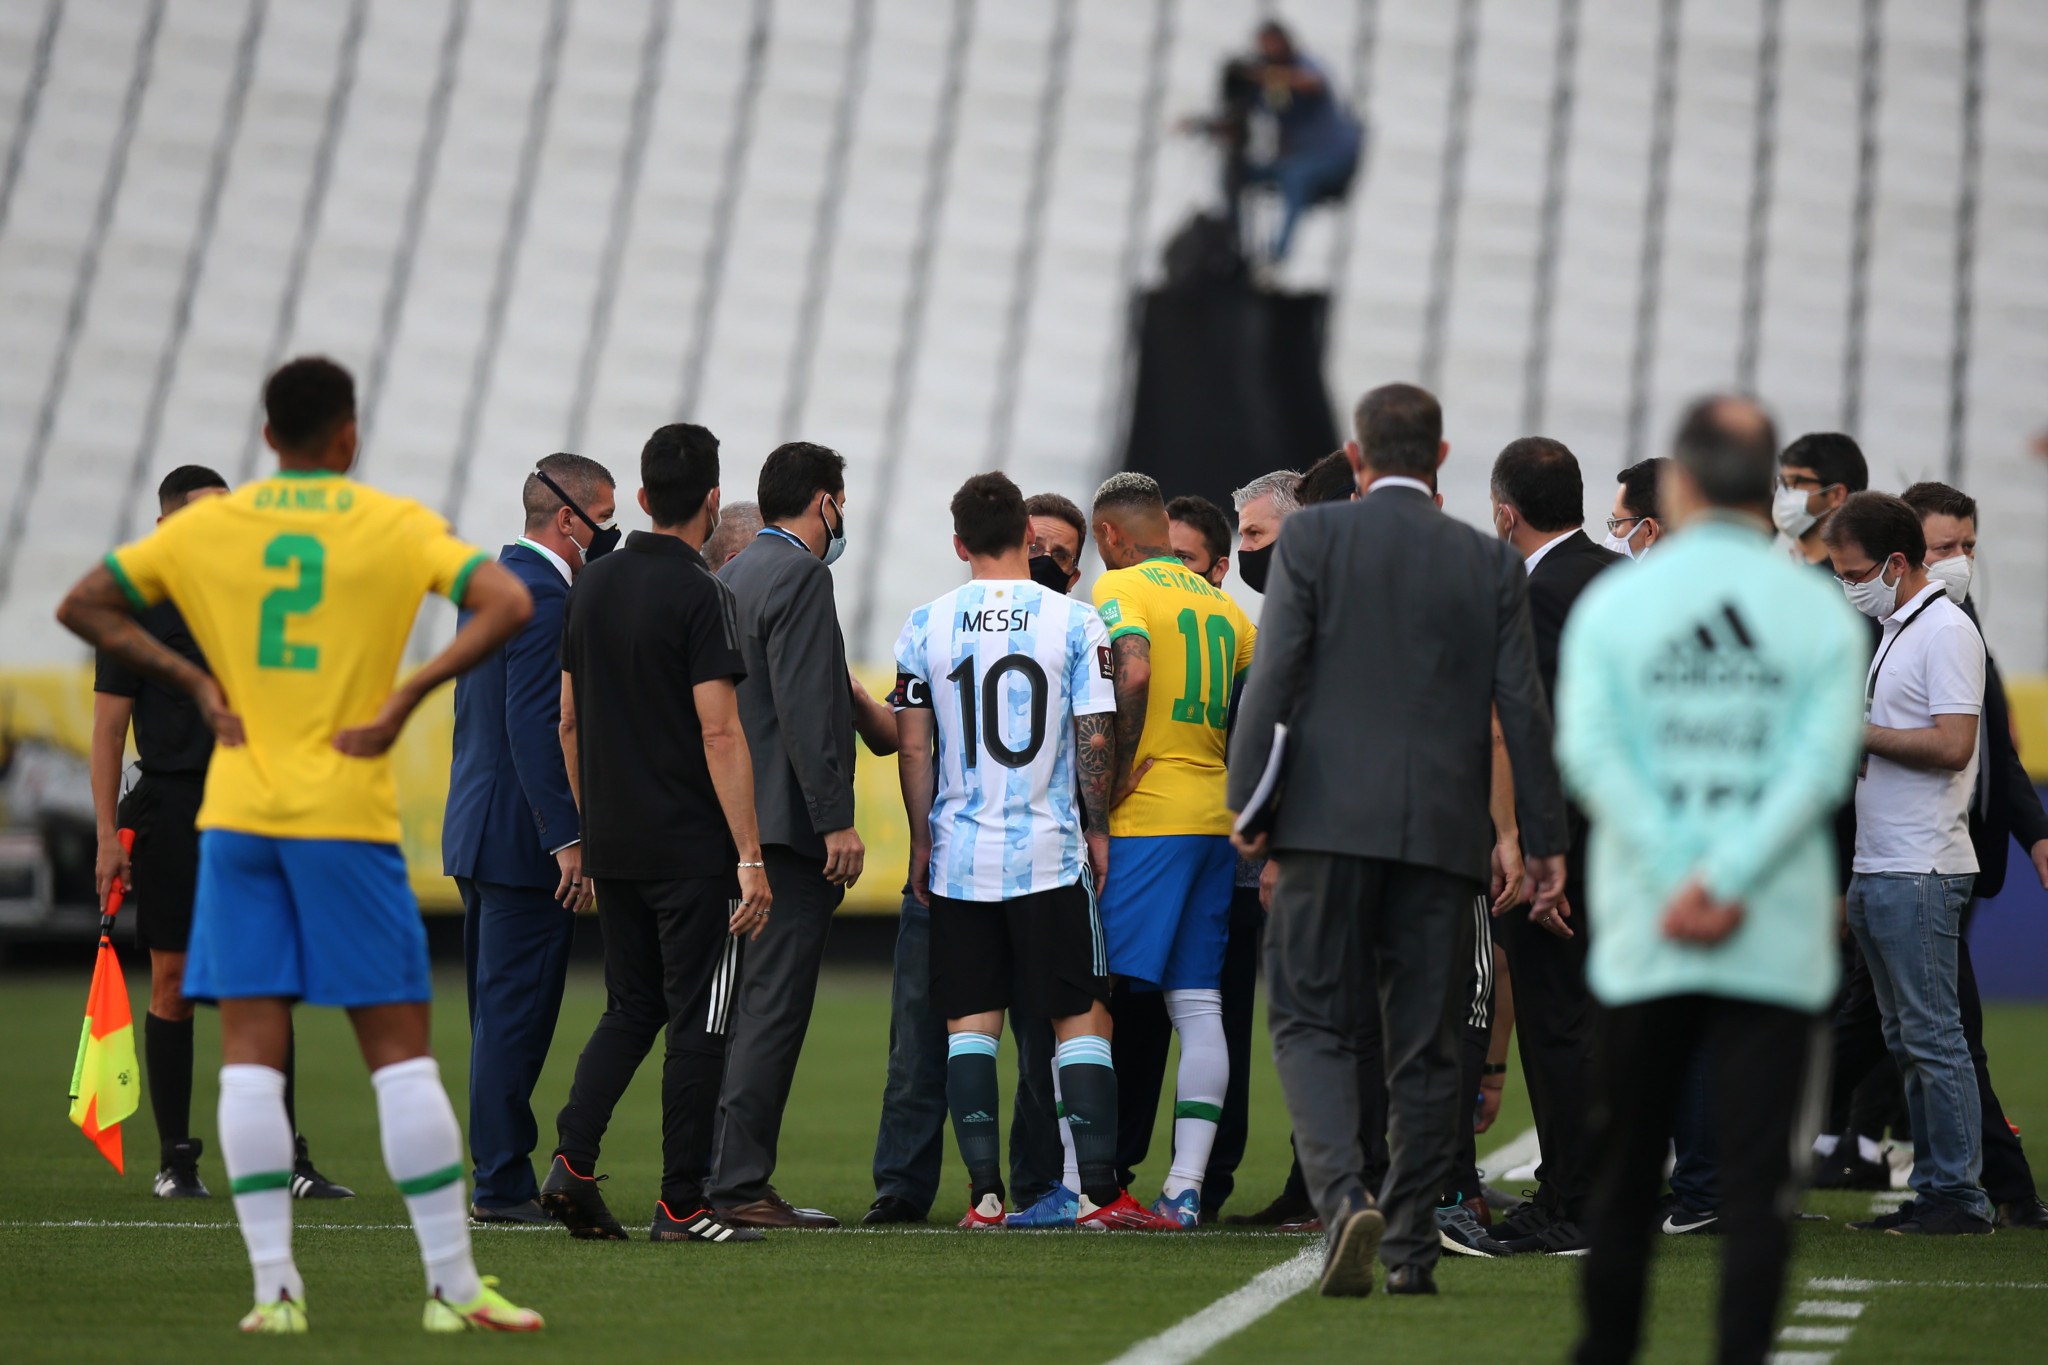 Argentina and Brazil's qualification match descended into farce last month ©Getty Images